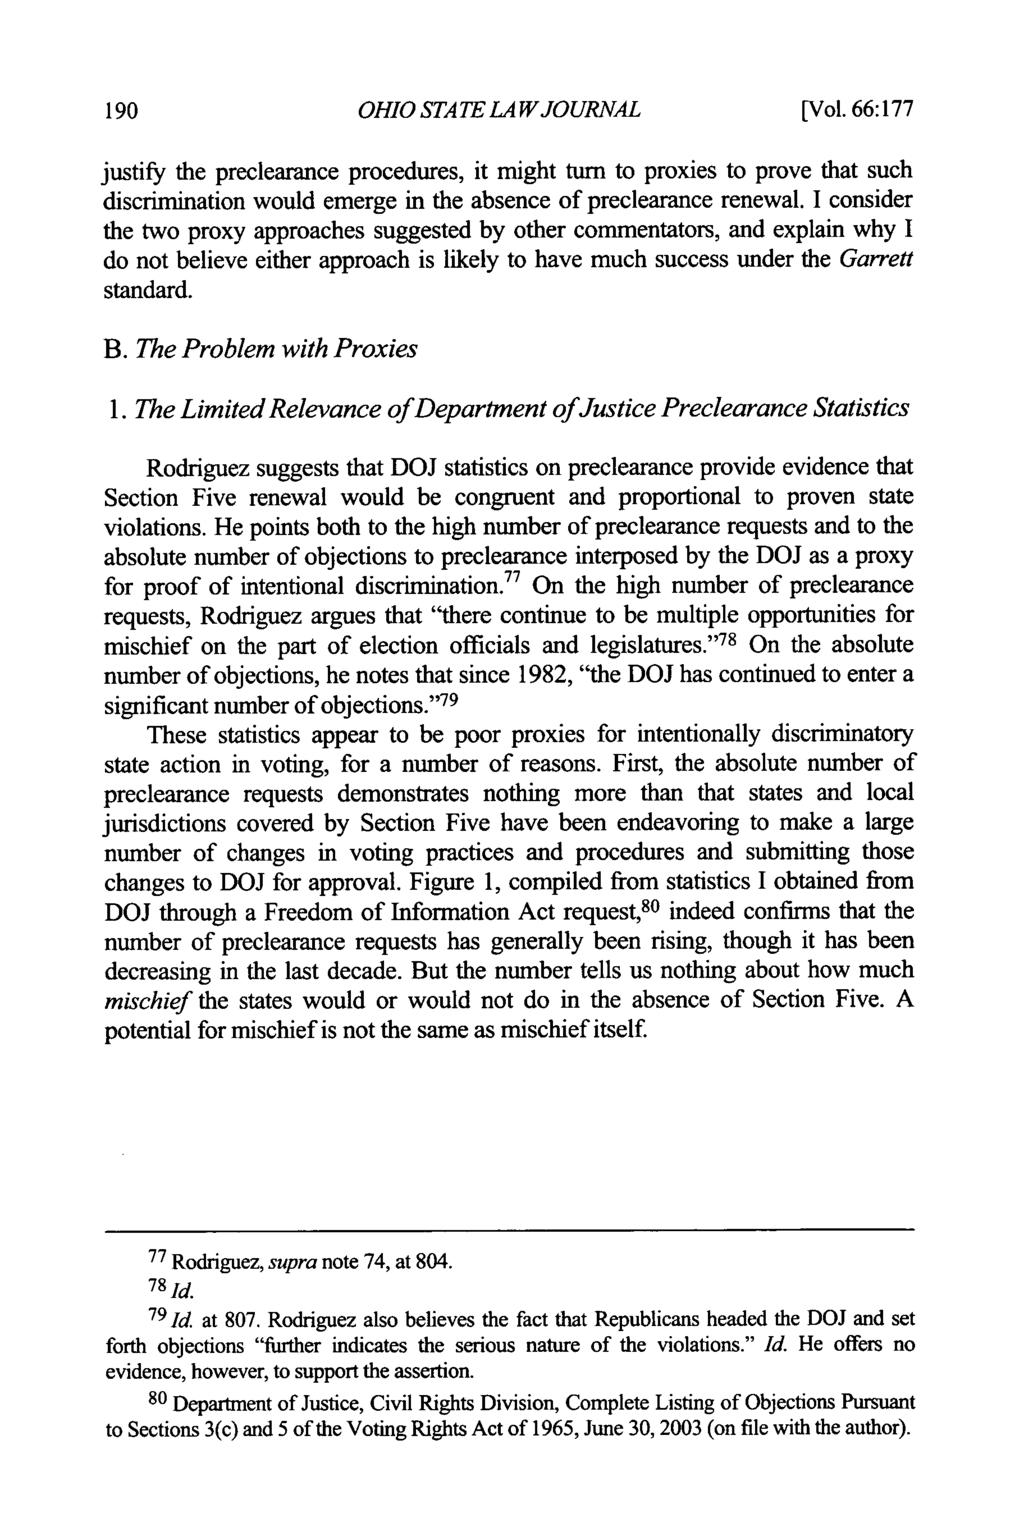 OHIO STATE LA WJOURNAL [Vol. 66:177 justify the preclearance procedures, it might turn to proxies to prove that such discrimination would emerge in the absence of preclearance renewal.